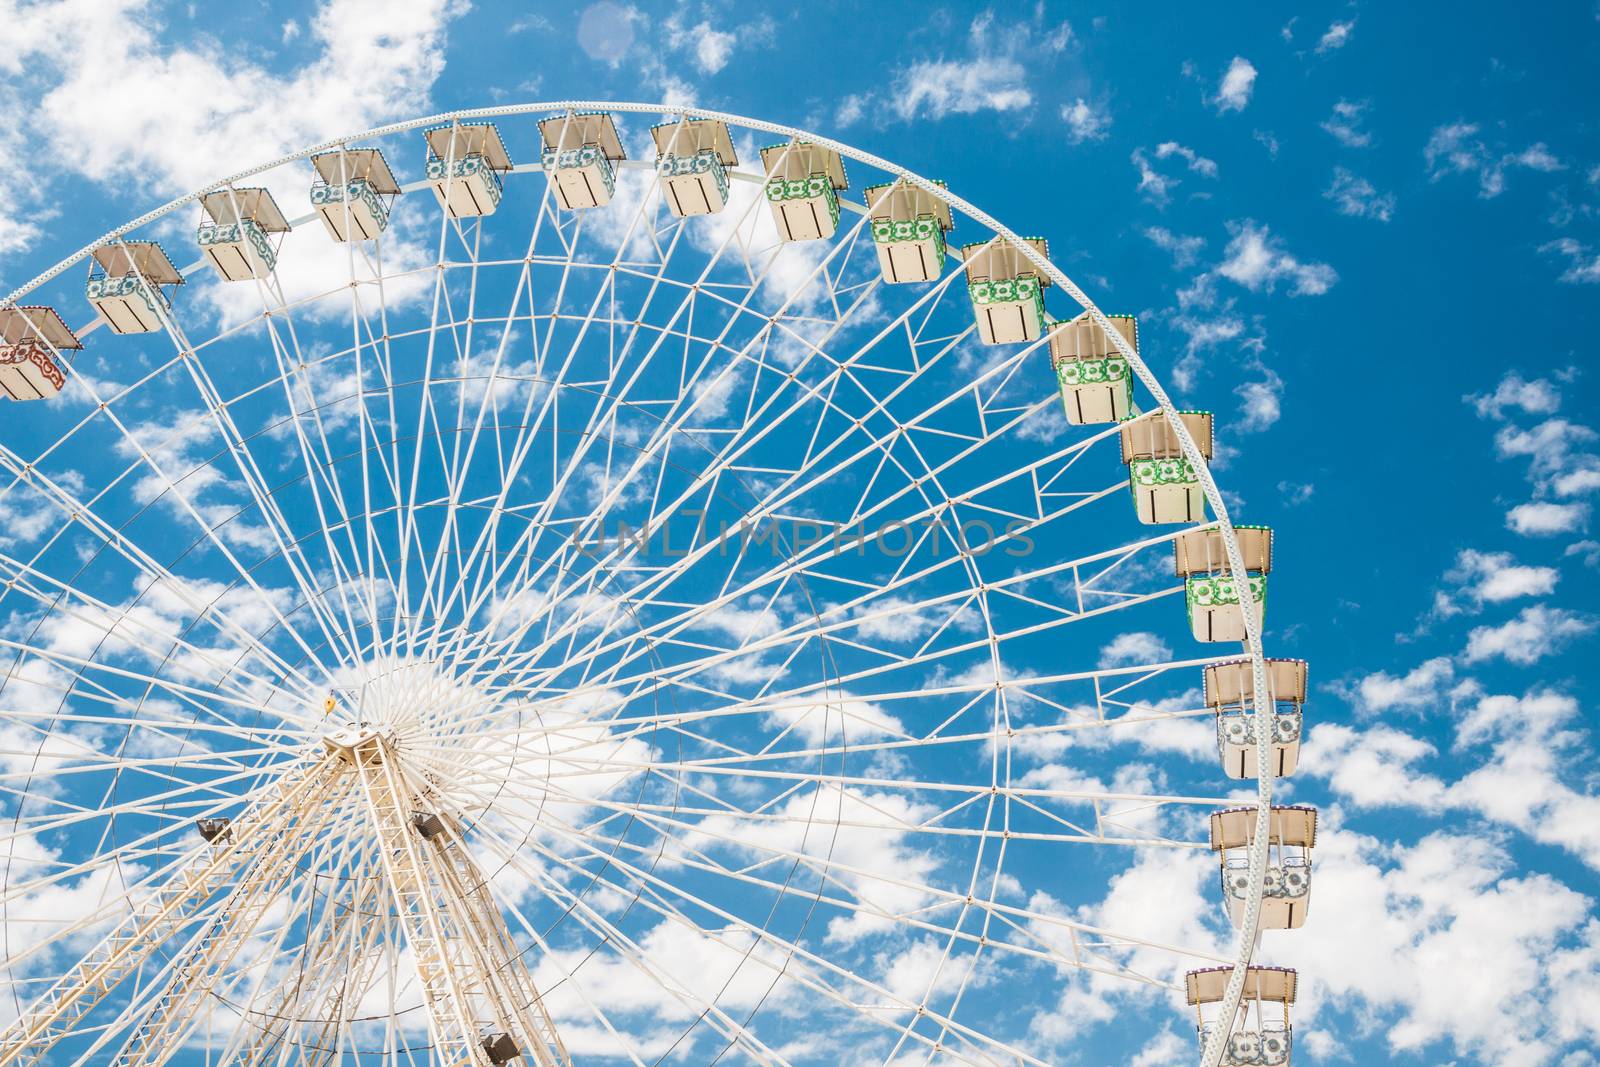 Ferris wheel of fair and amusement park.  White clouds in the blue sky in background.